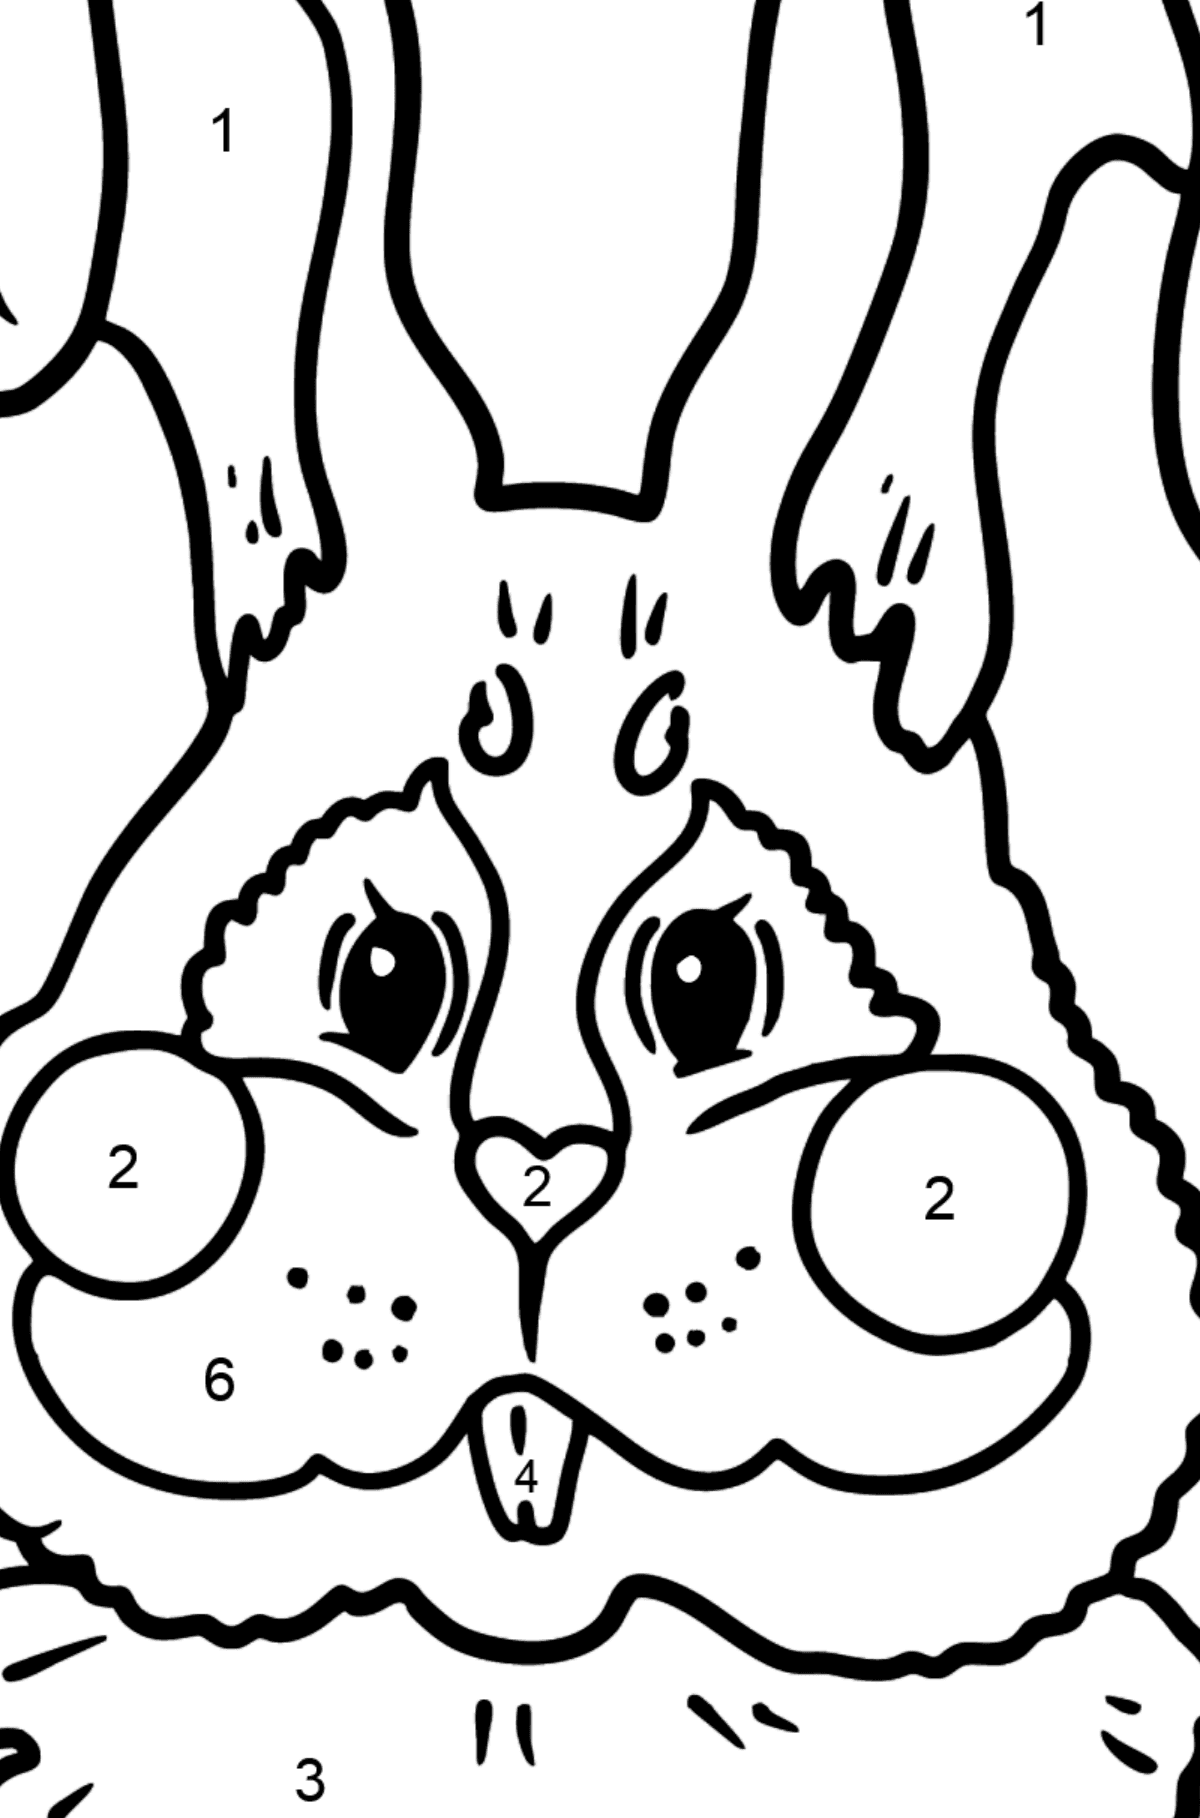 Bunny Face coloring page - Coloring by Numbers for Kids